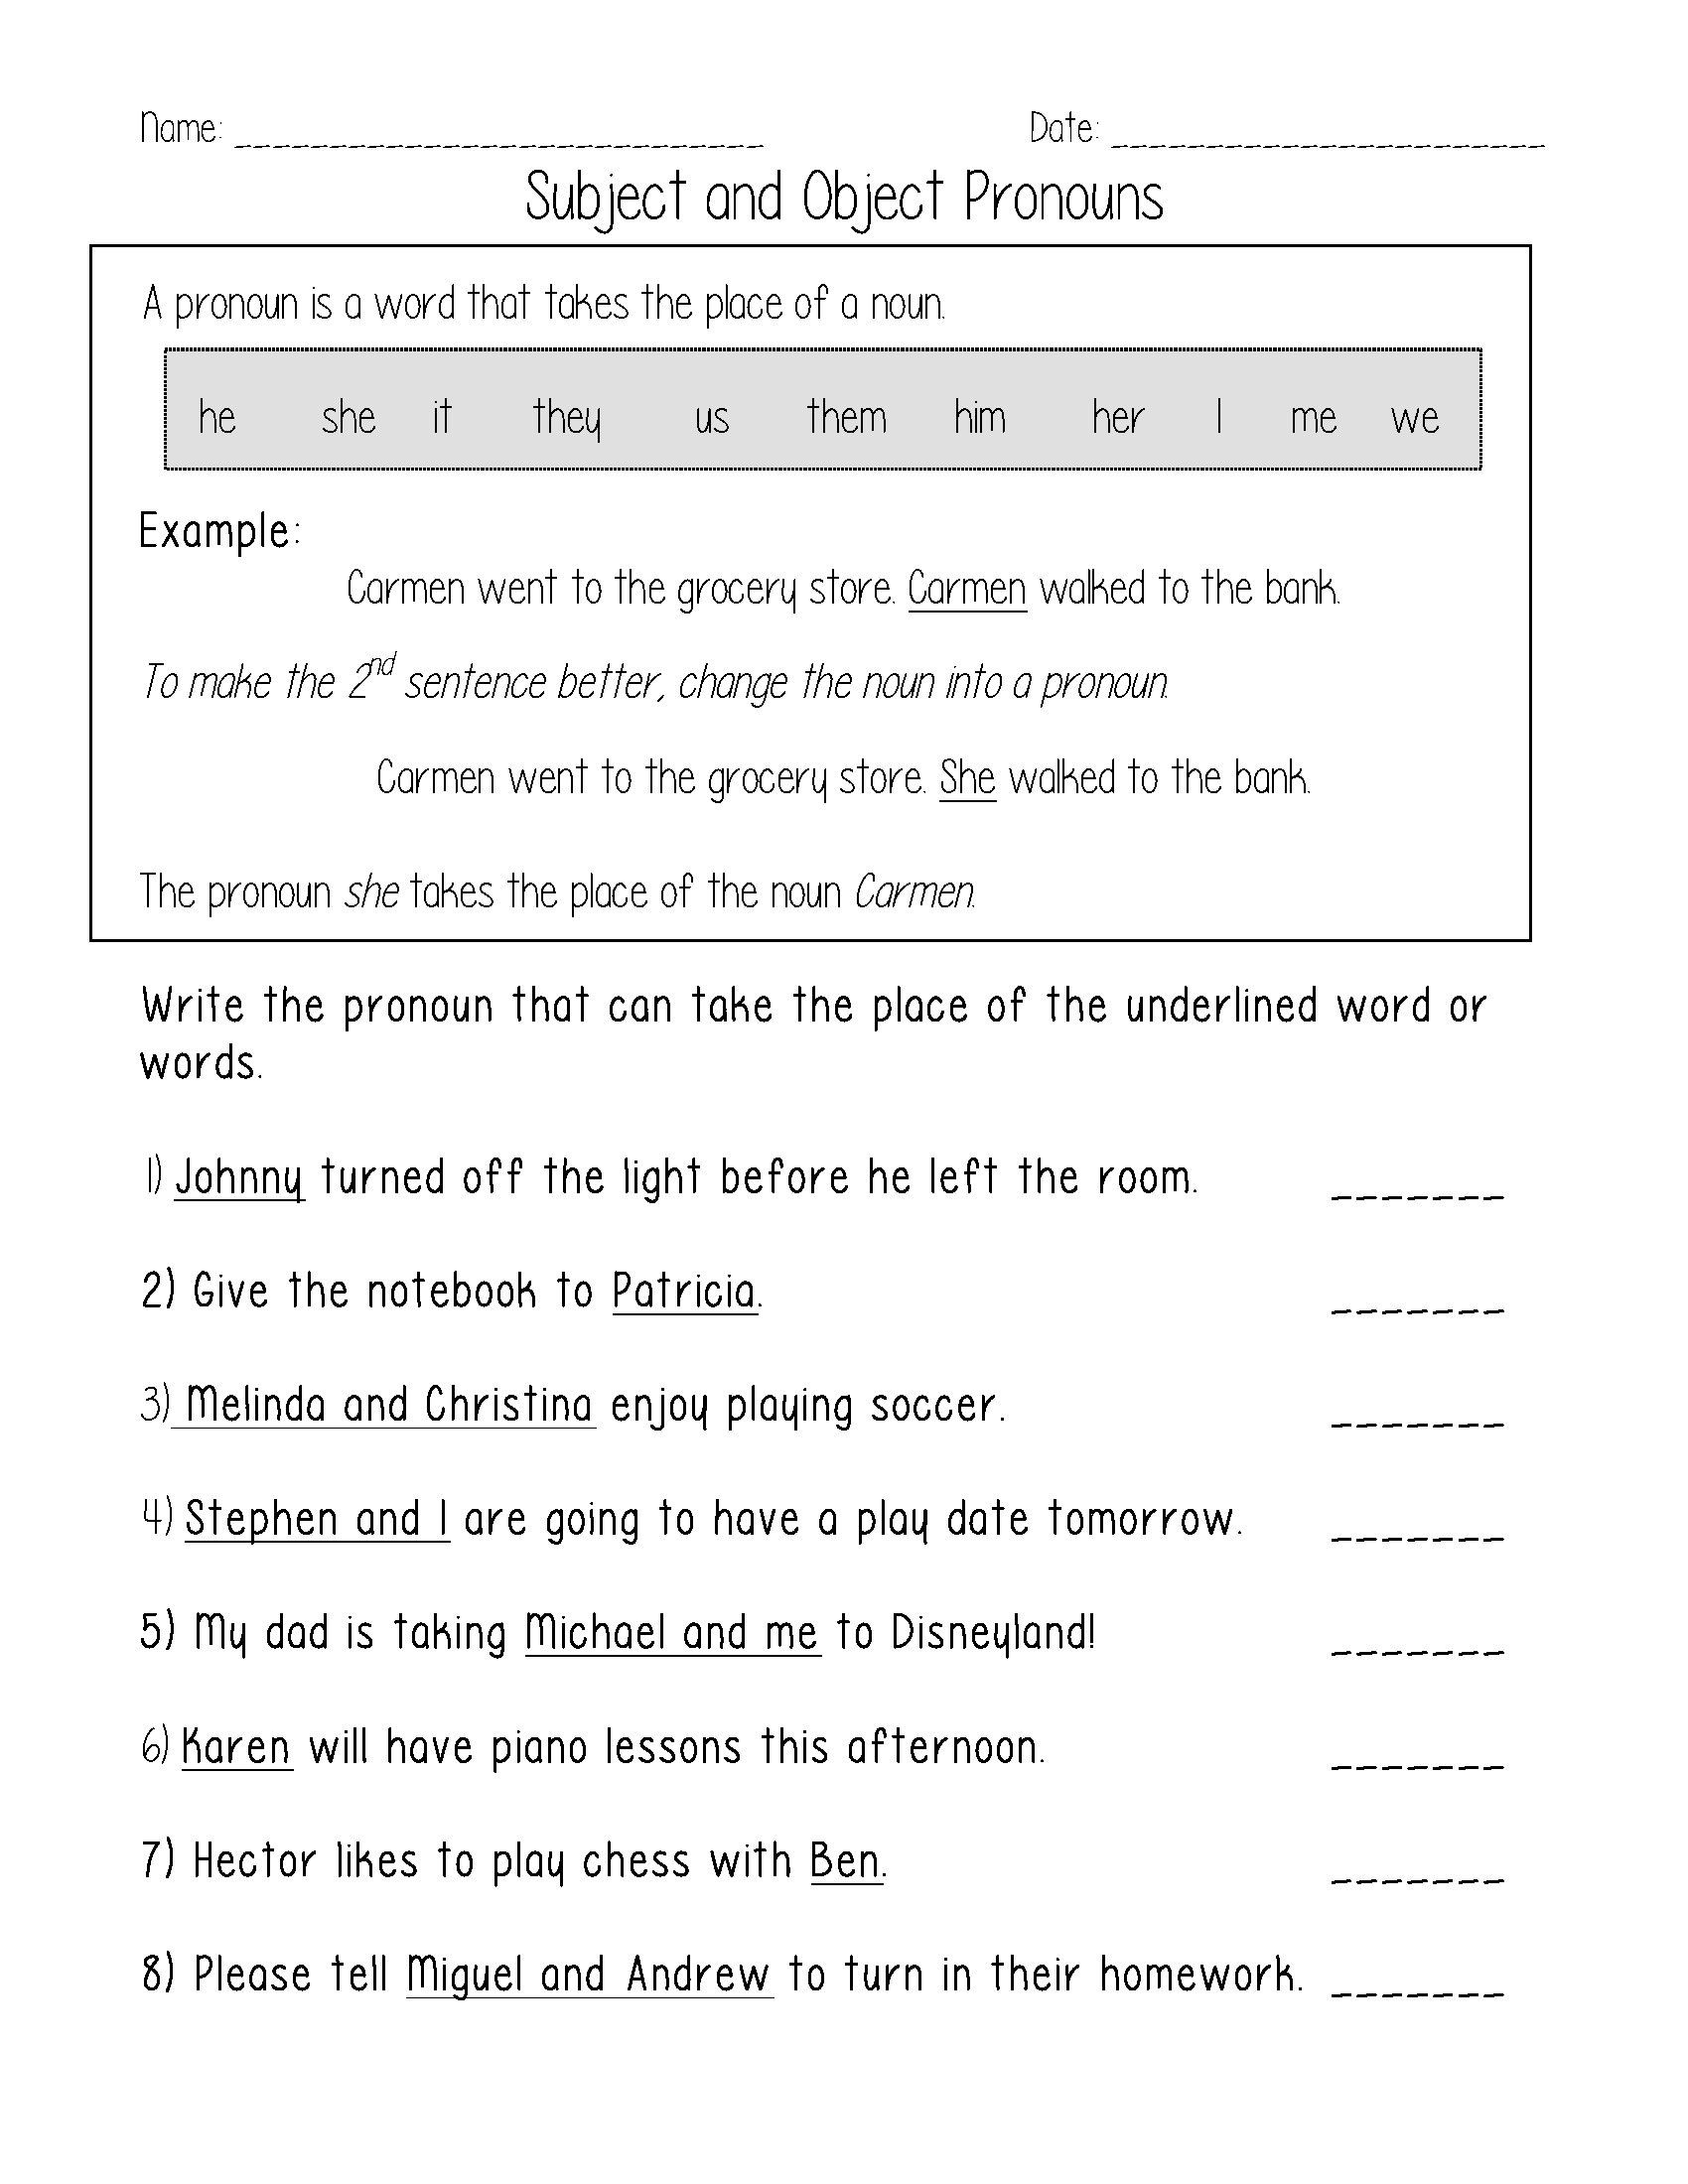 Pronoun Worksheets for 2nd Graders 2nd Grade Esl Worksheet Valid Subject and Object Pronouns